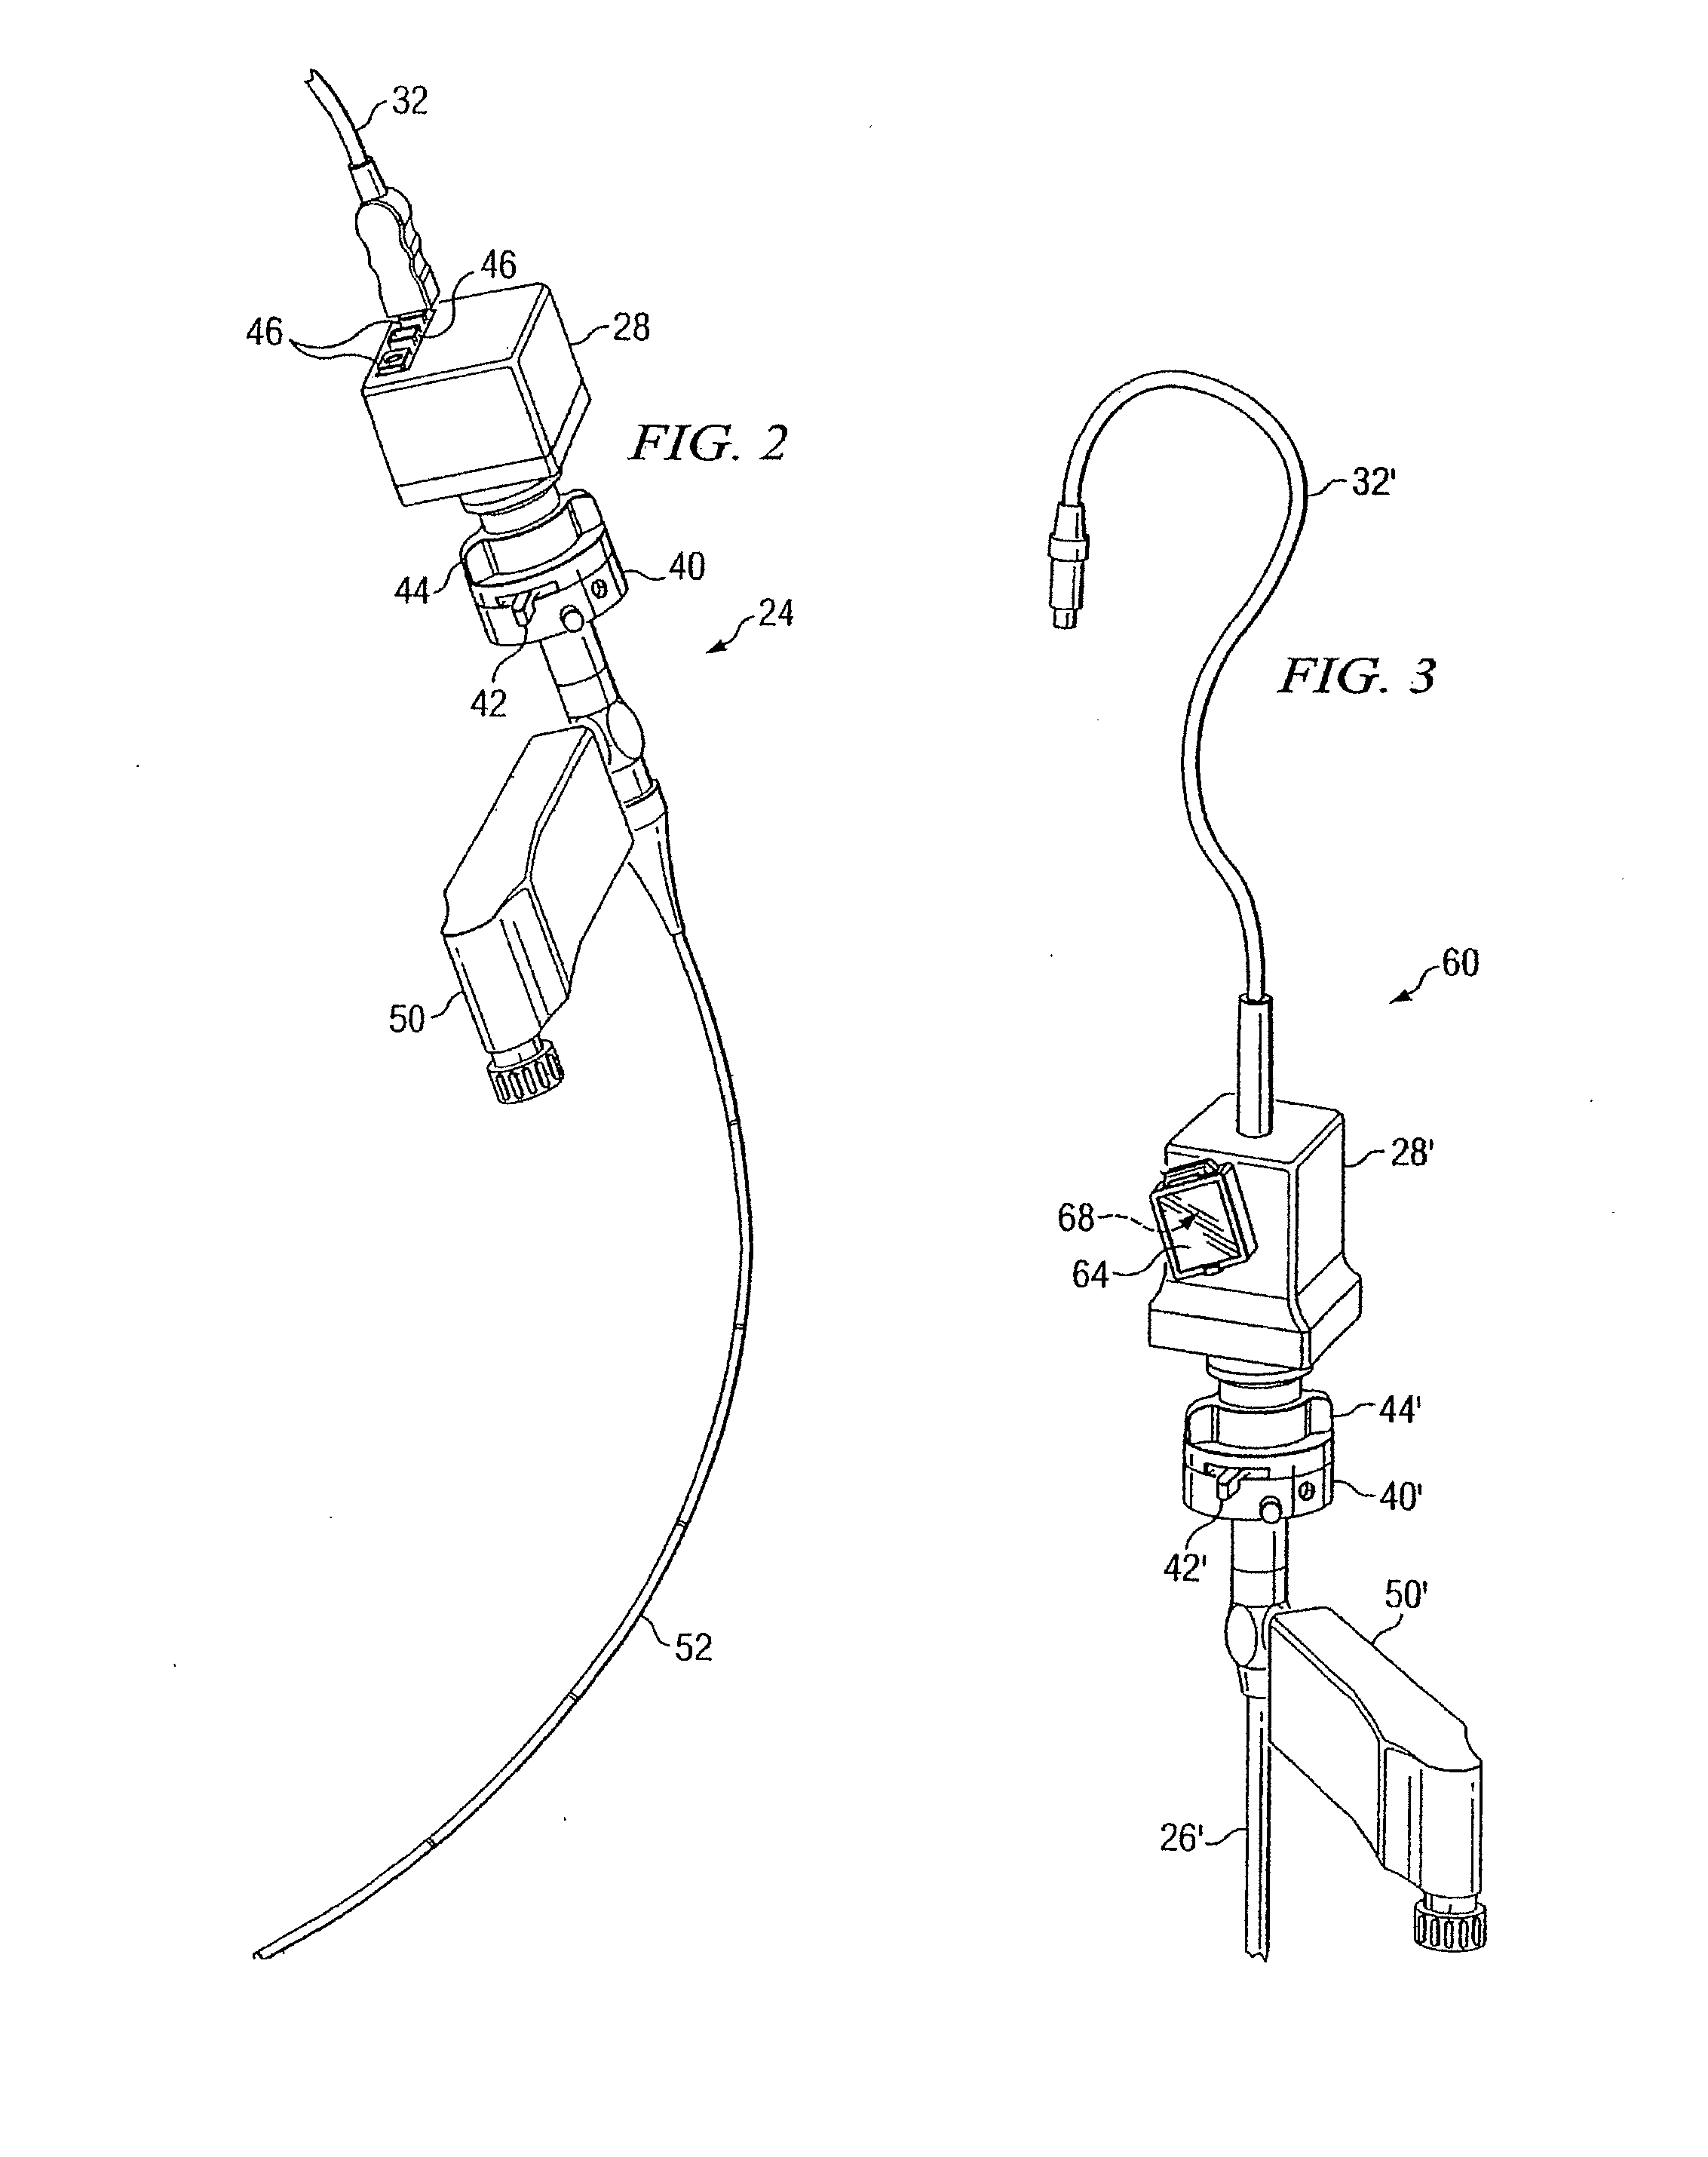 Endoscopic imaging system